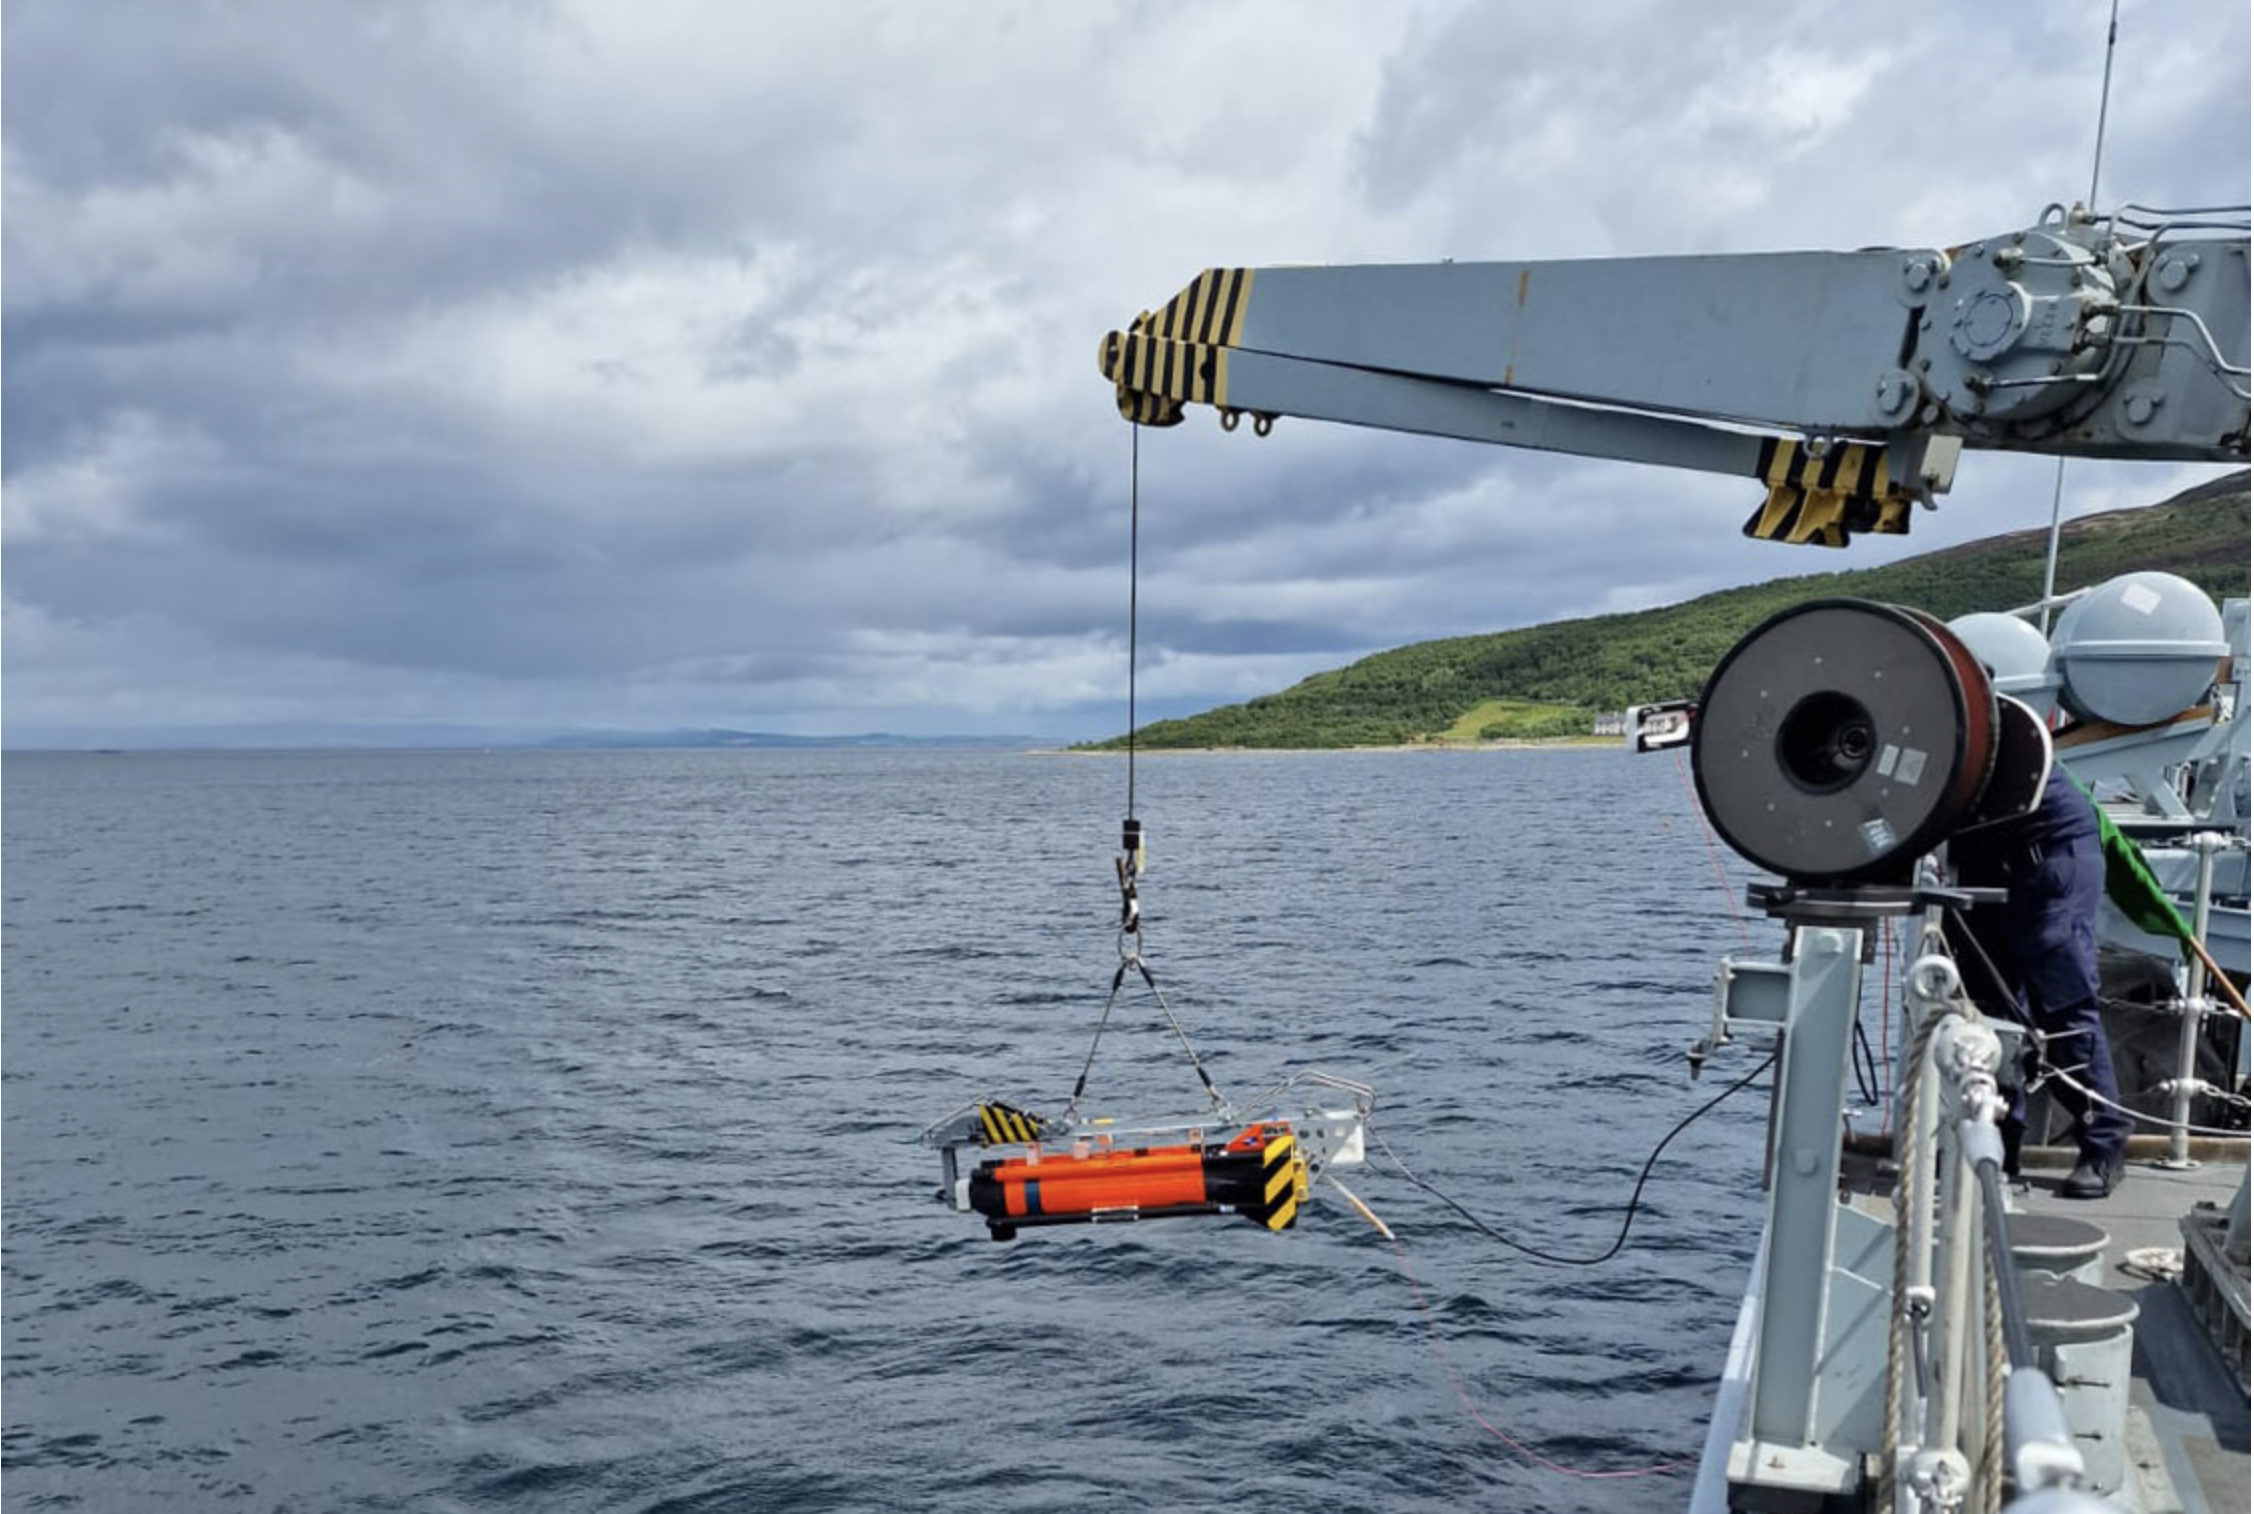 The Royal Navy testing  its remotely-piloted underwater vessel Seafox to locate mines